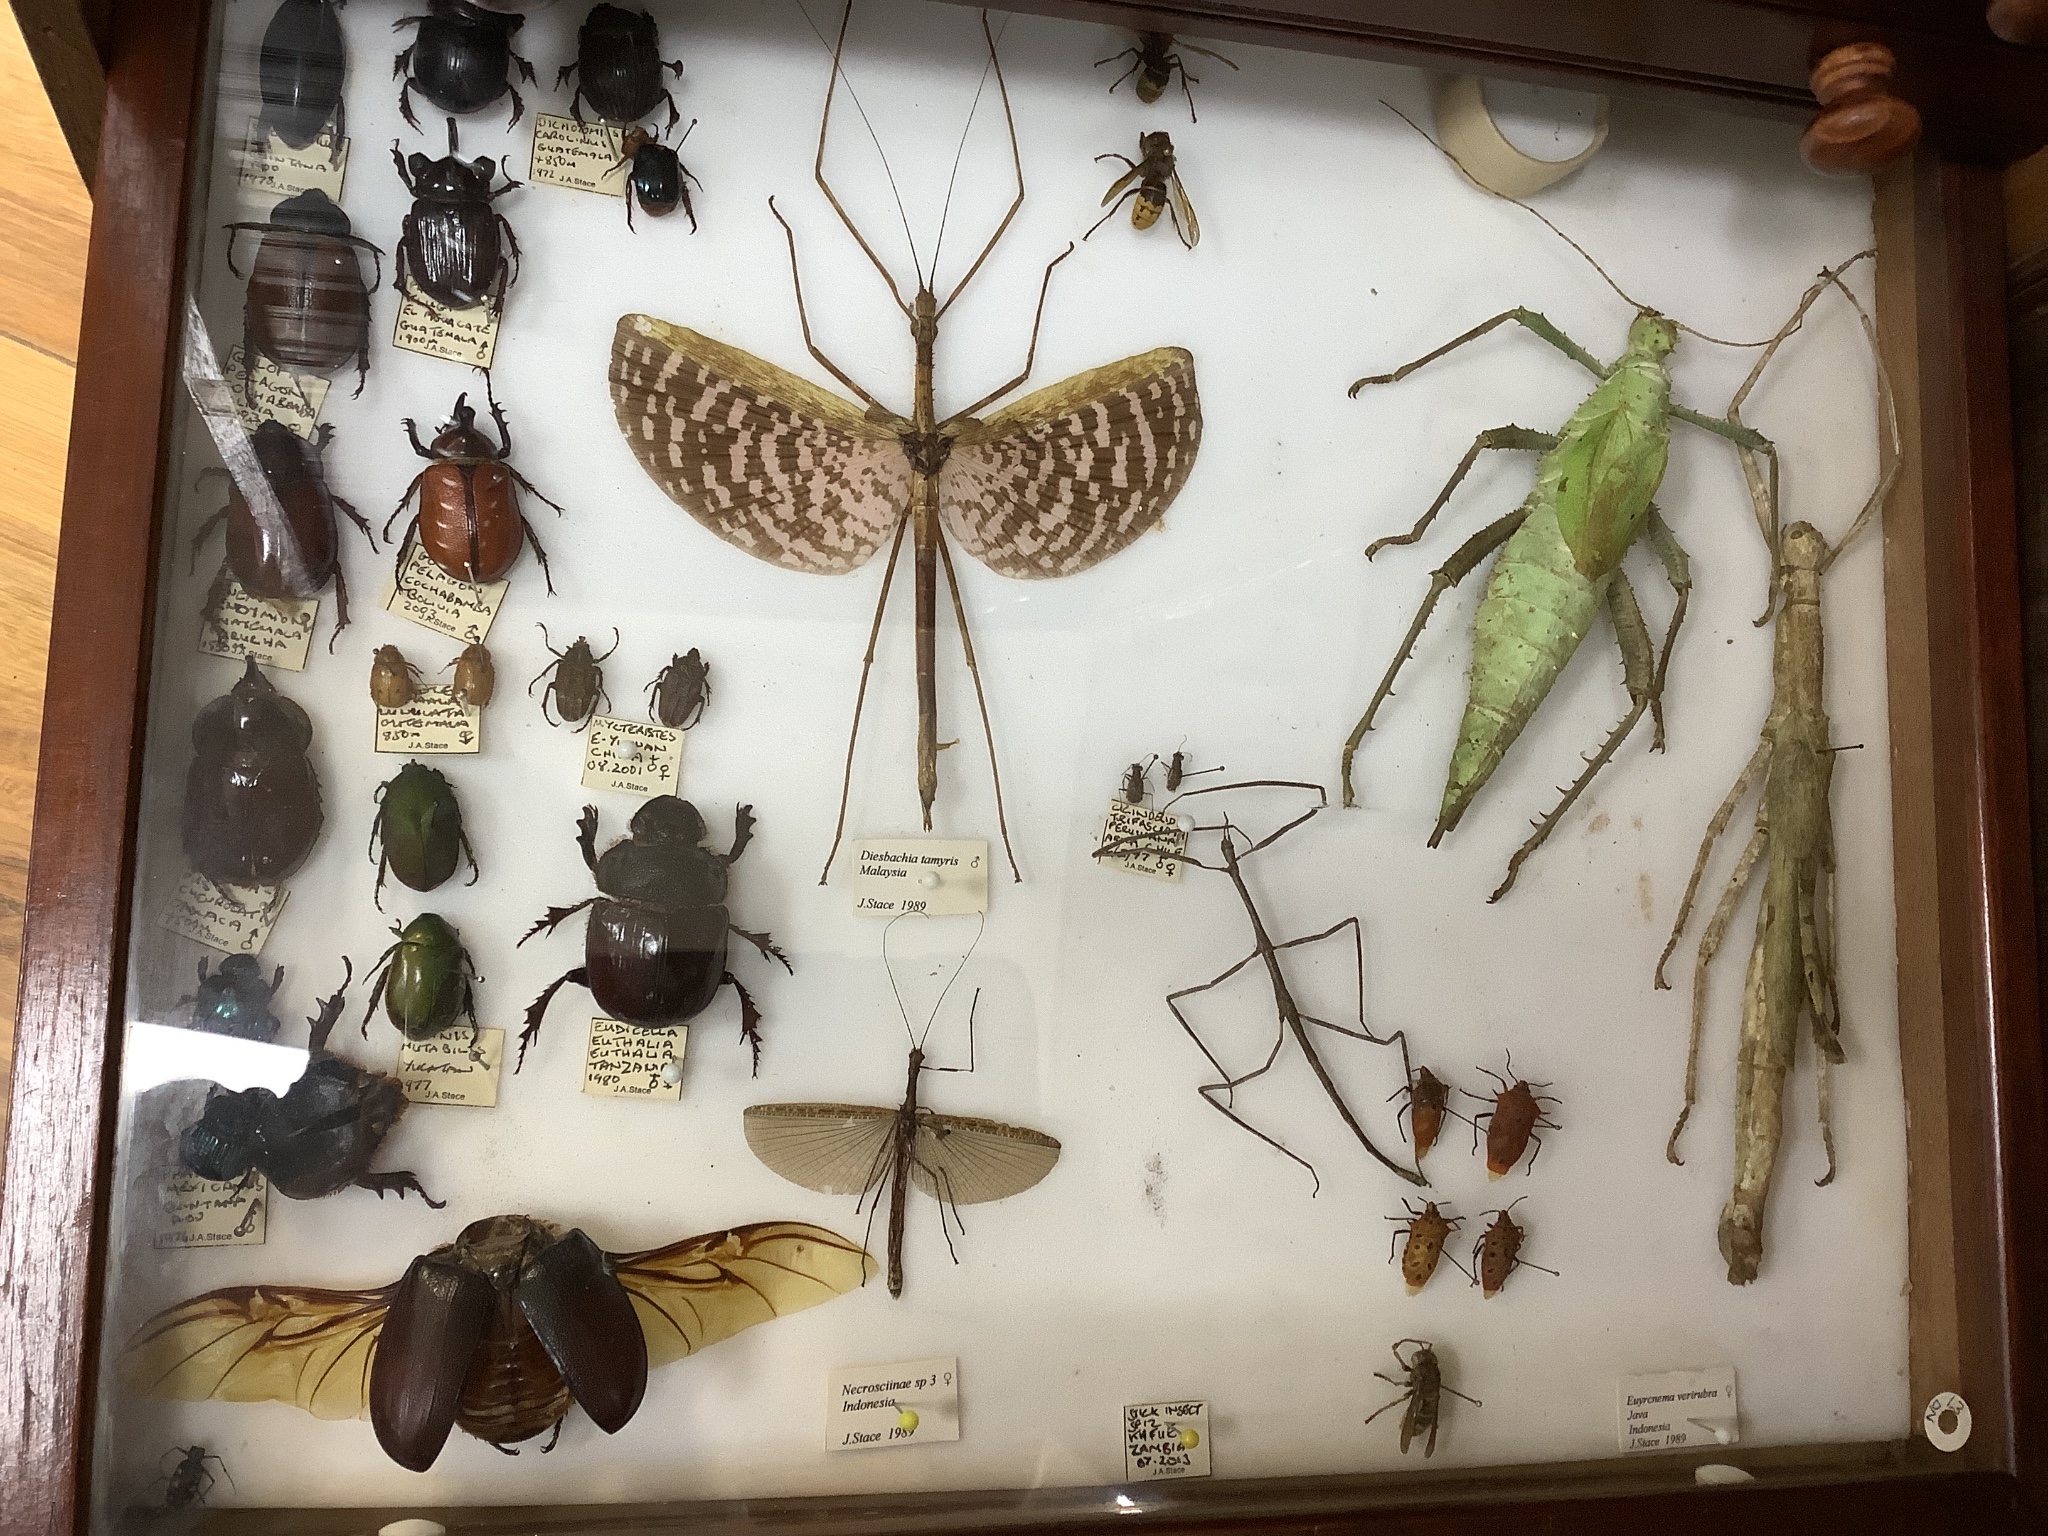 A private collection of Entomology, Taxidermy and Fossil Specimens, Lots 358 - 407., Entomology- a cabinet of World beetle, insect, carabid and arachnid specimens, in 16 drawers, 98 cm high, 46 cm wide